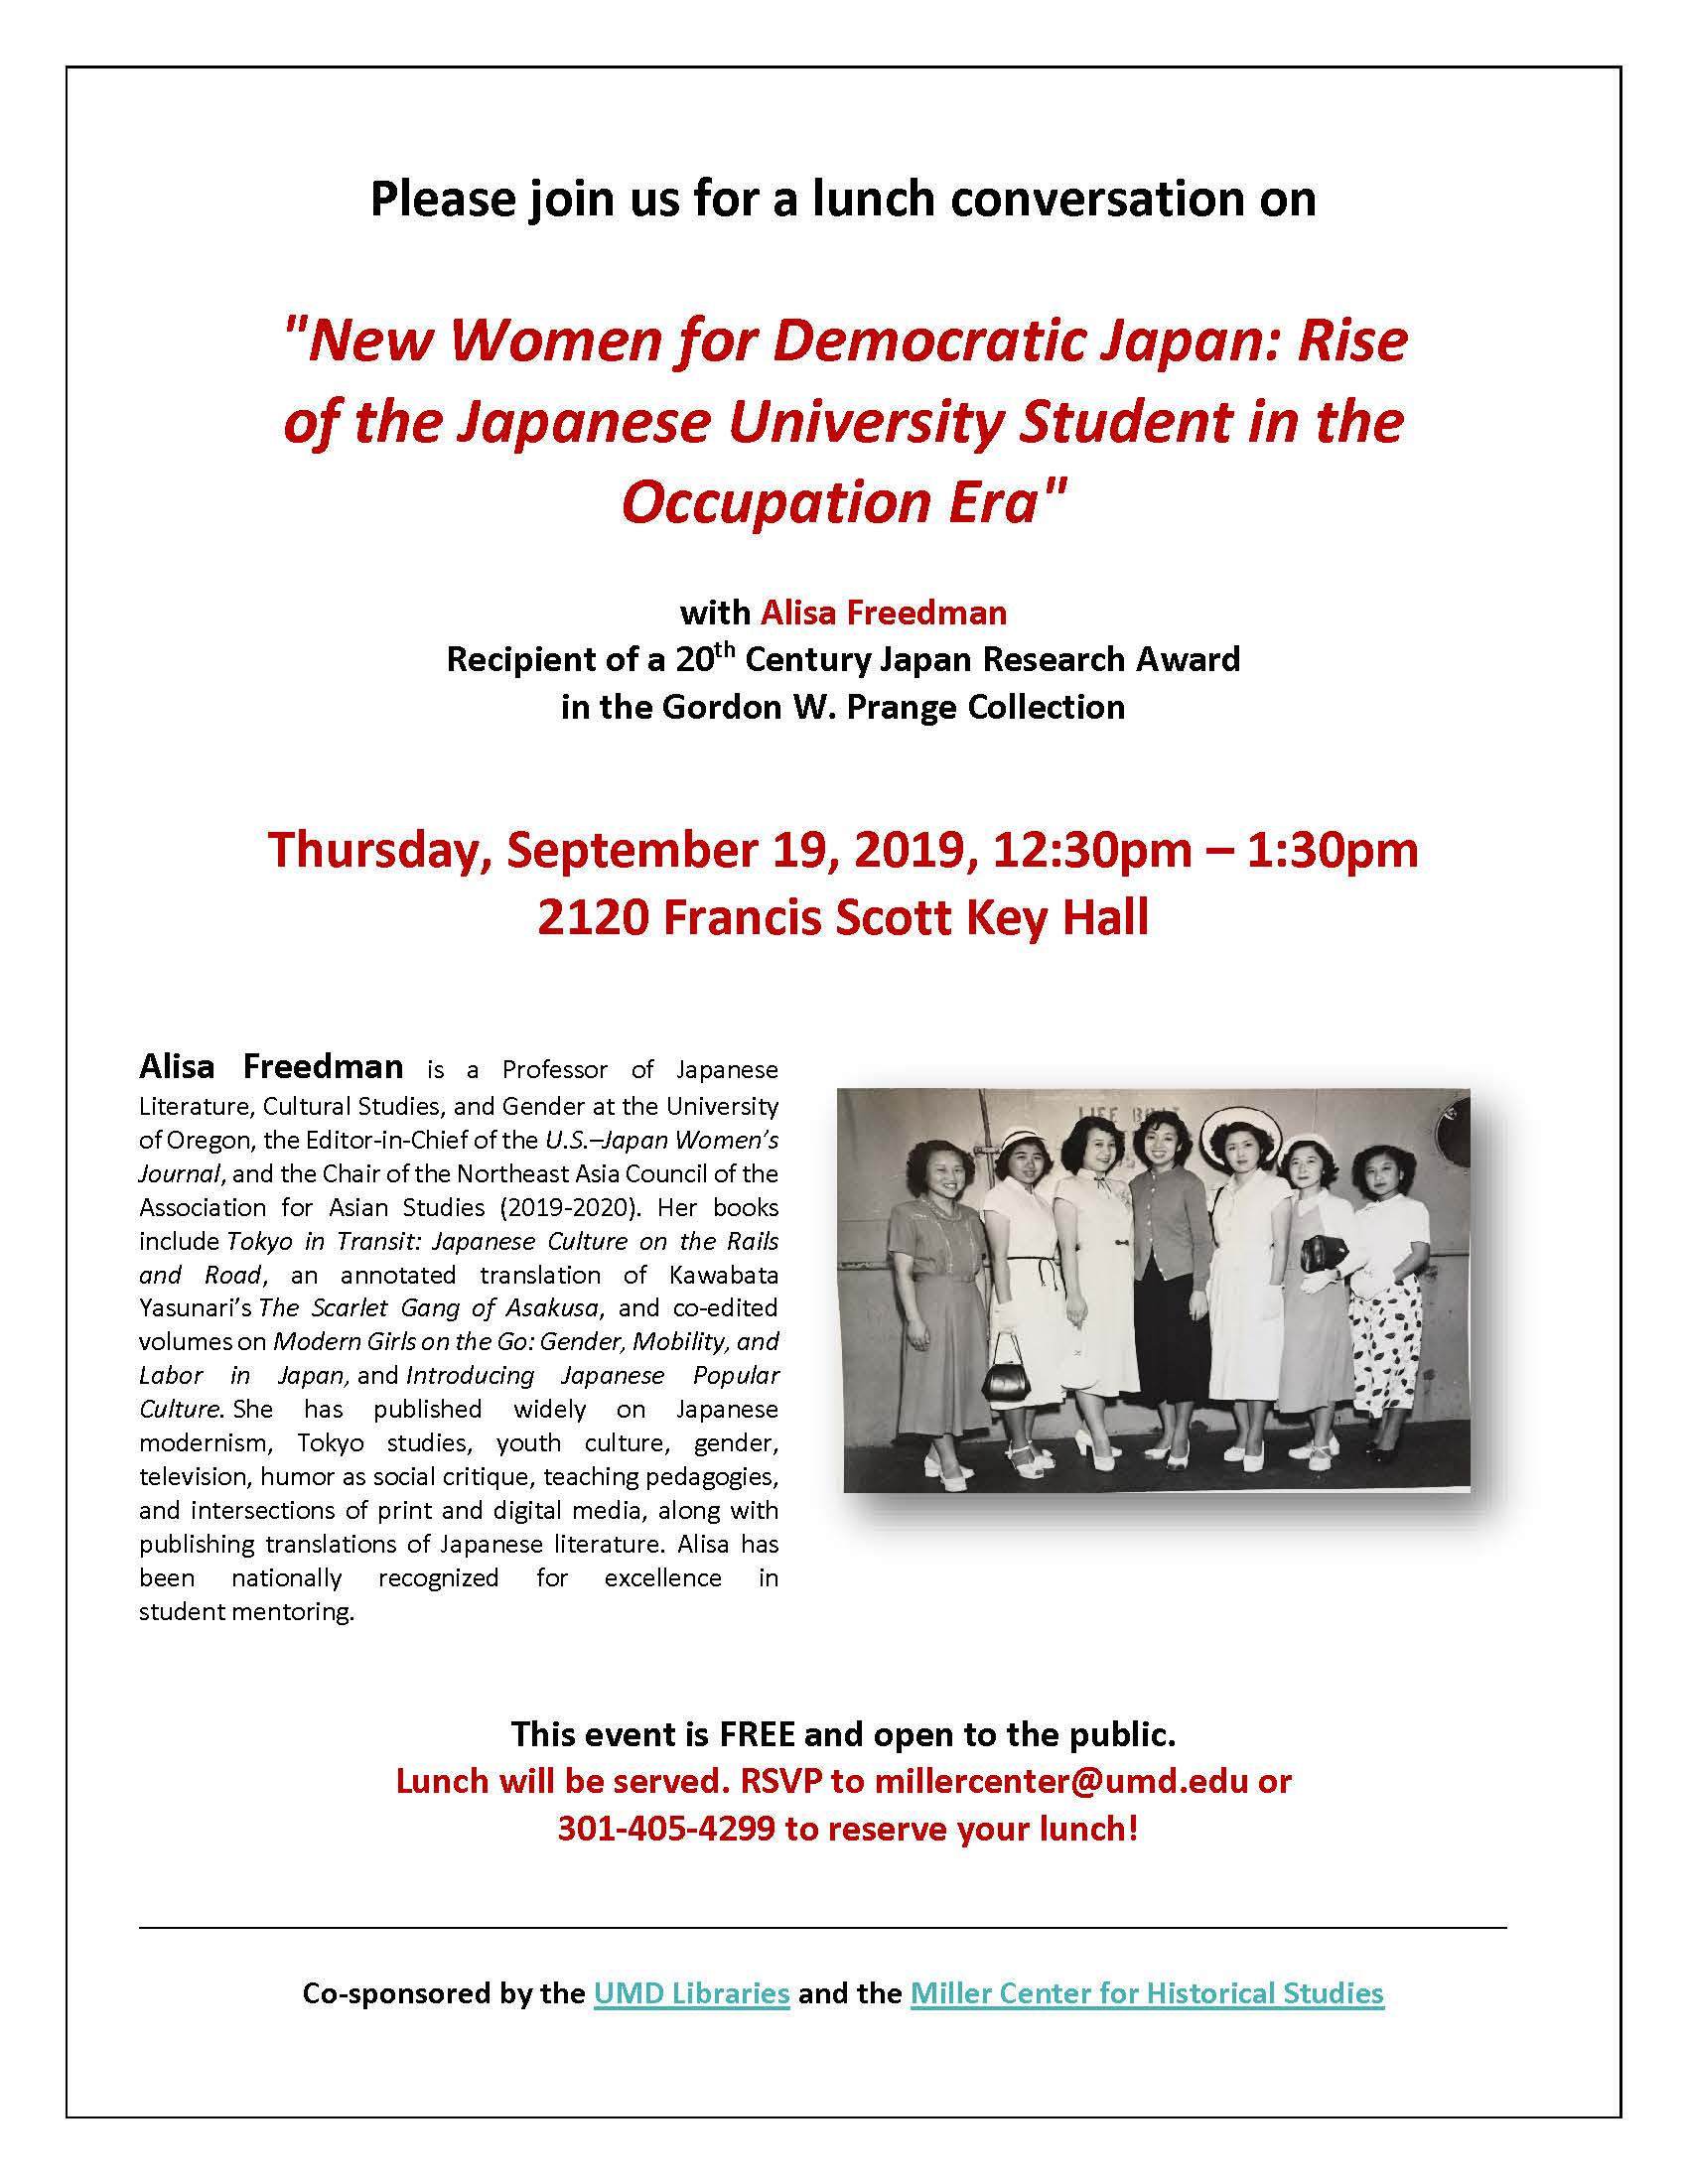 Image for event - New Women for Democratic Japan: Rise of the Japanese University Student in the Occupation Era